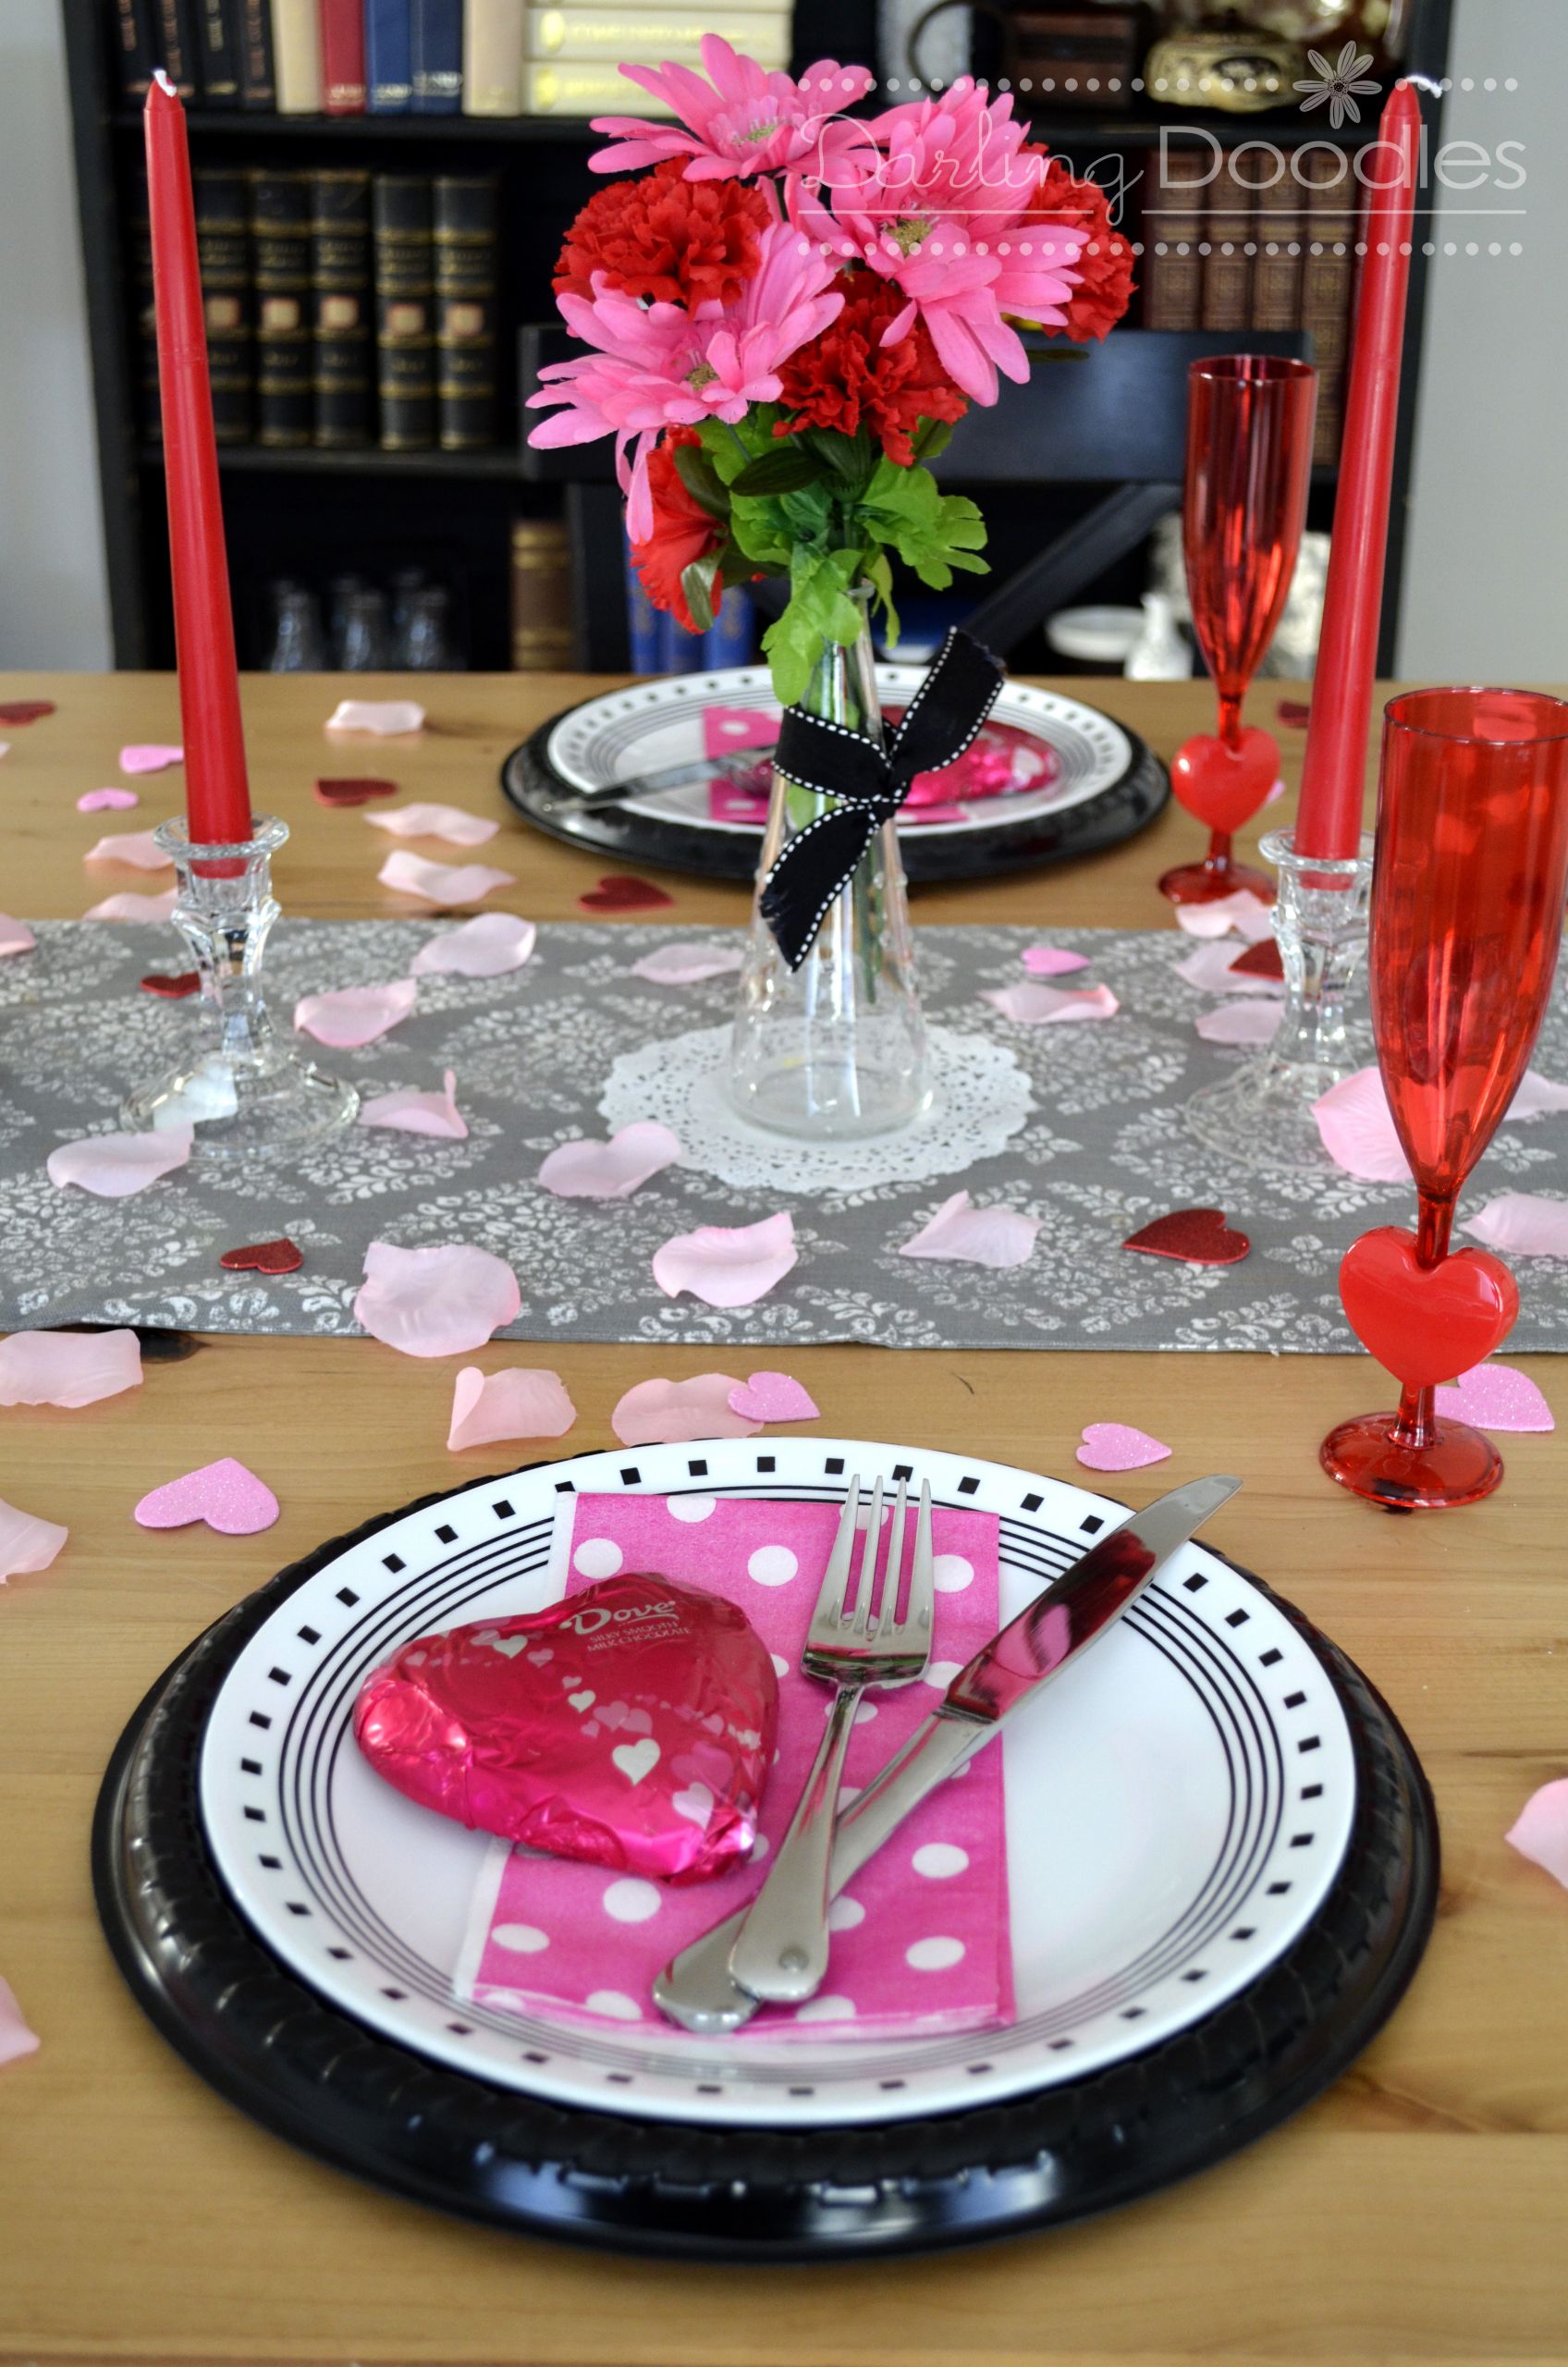 Romantic Dinner Date Ideas
 Dinner for Two Darling Doodles